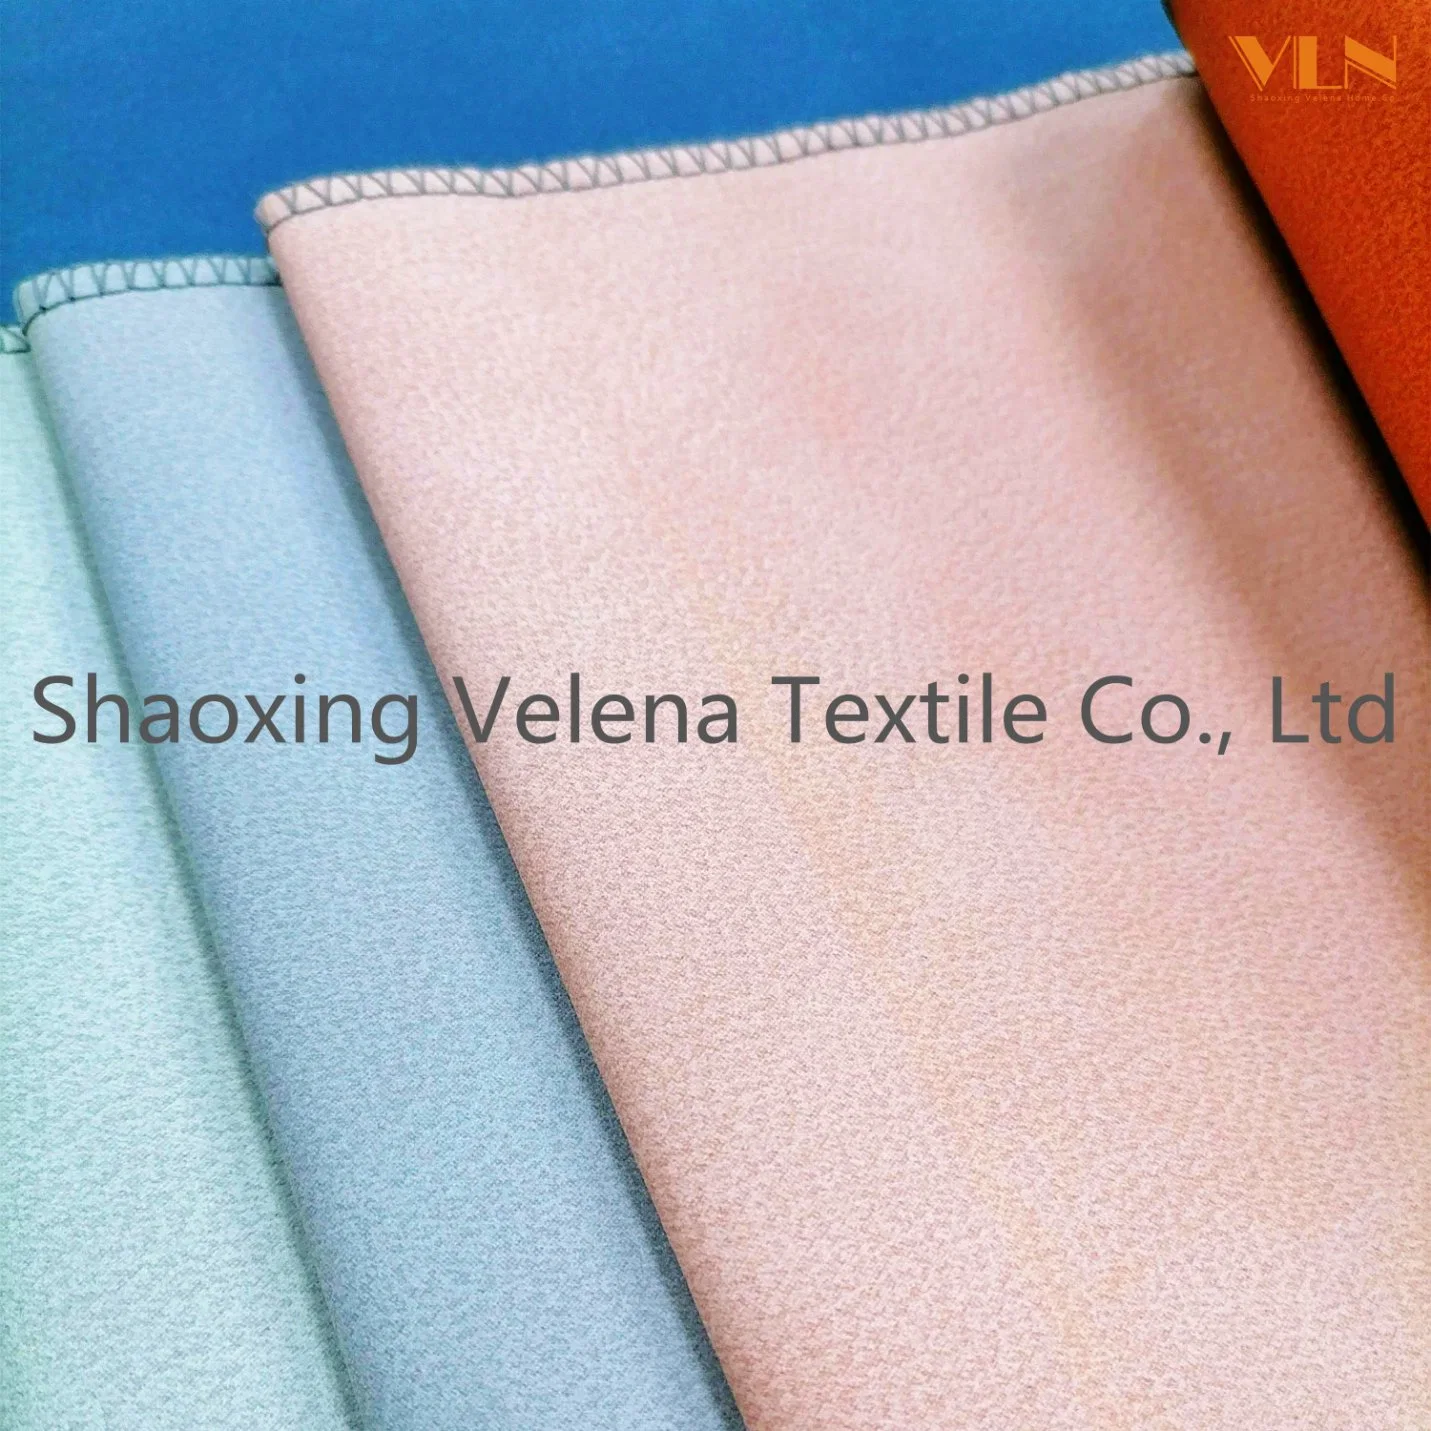 Technology Leather Suede 100% Polyester Velvet Fabric Dyeing with Glue Emboss Upholstery Furniture Sofa Textile Fabric